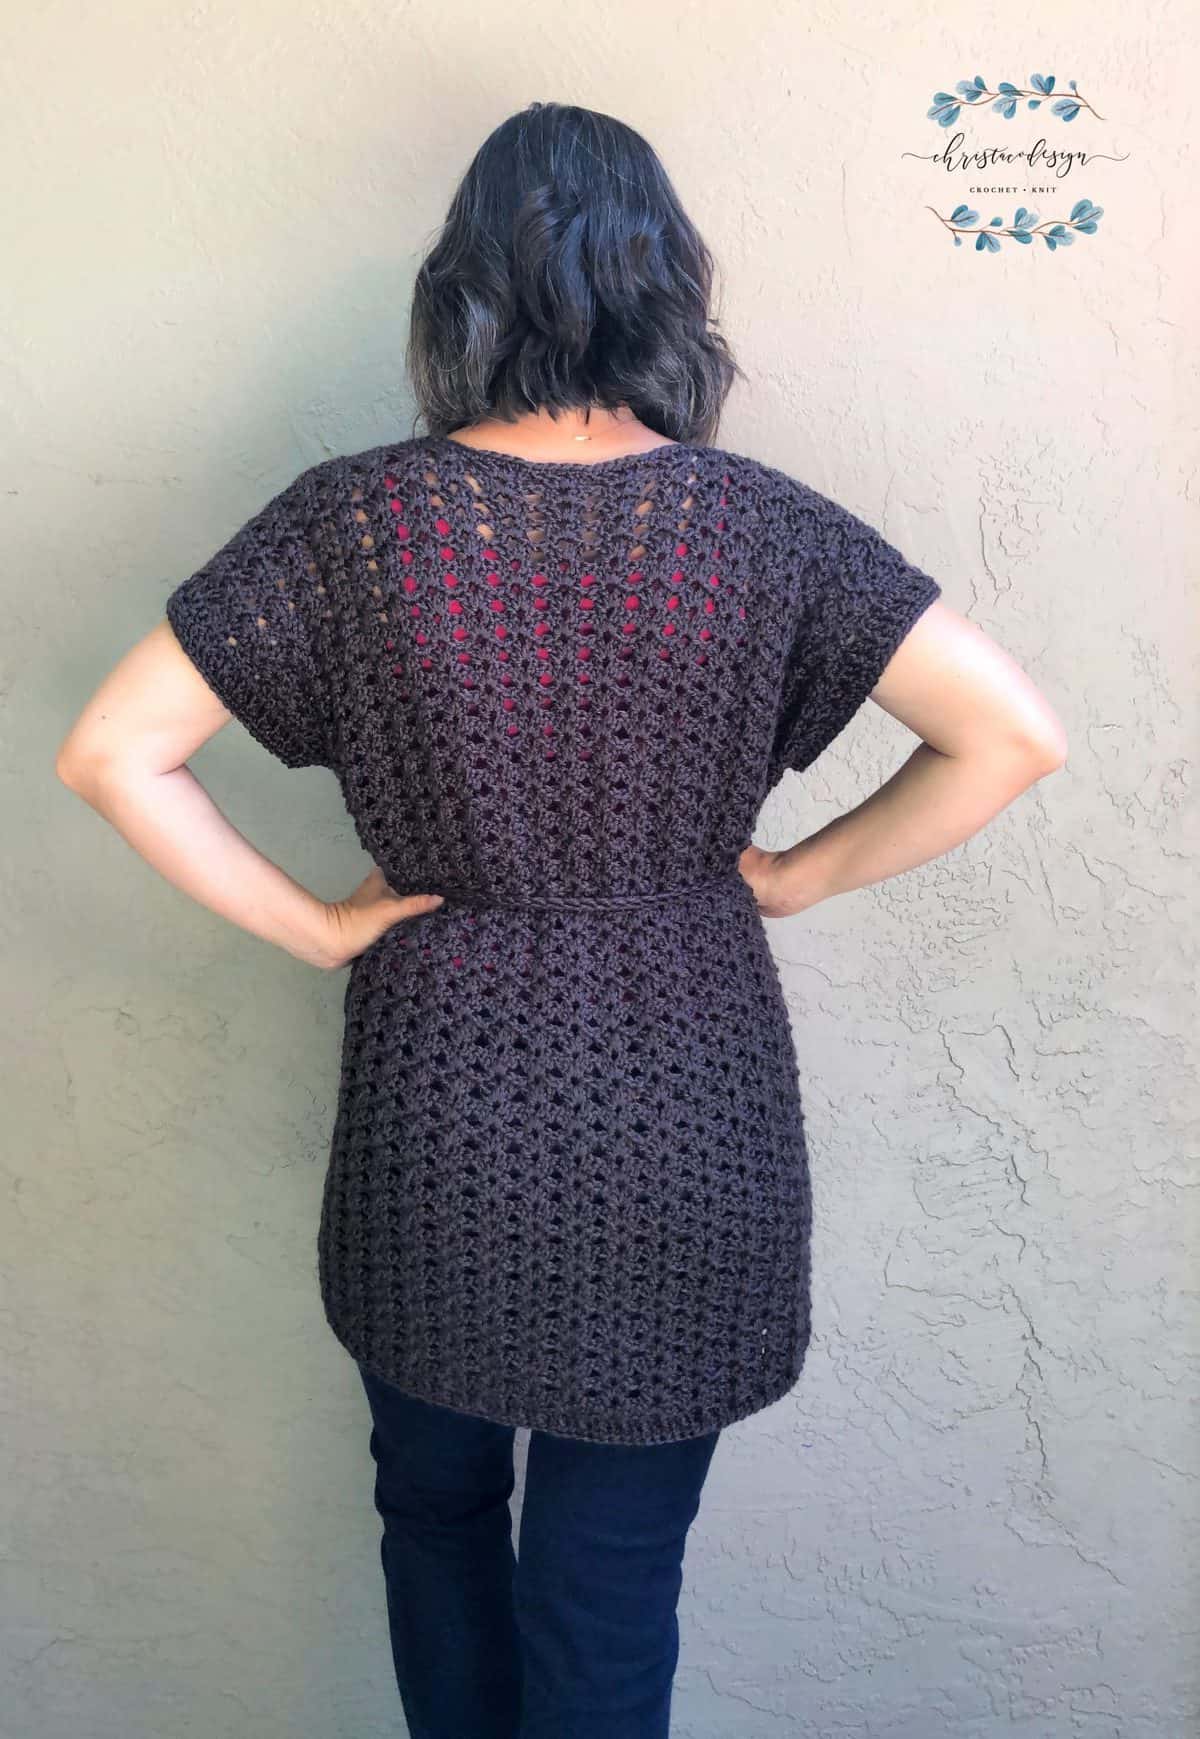 Back view of open stitch cardigan on woman.